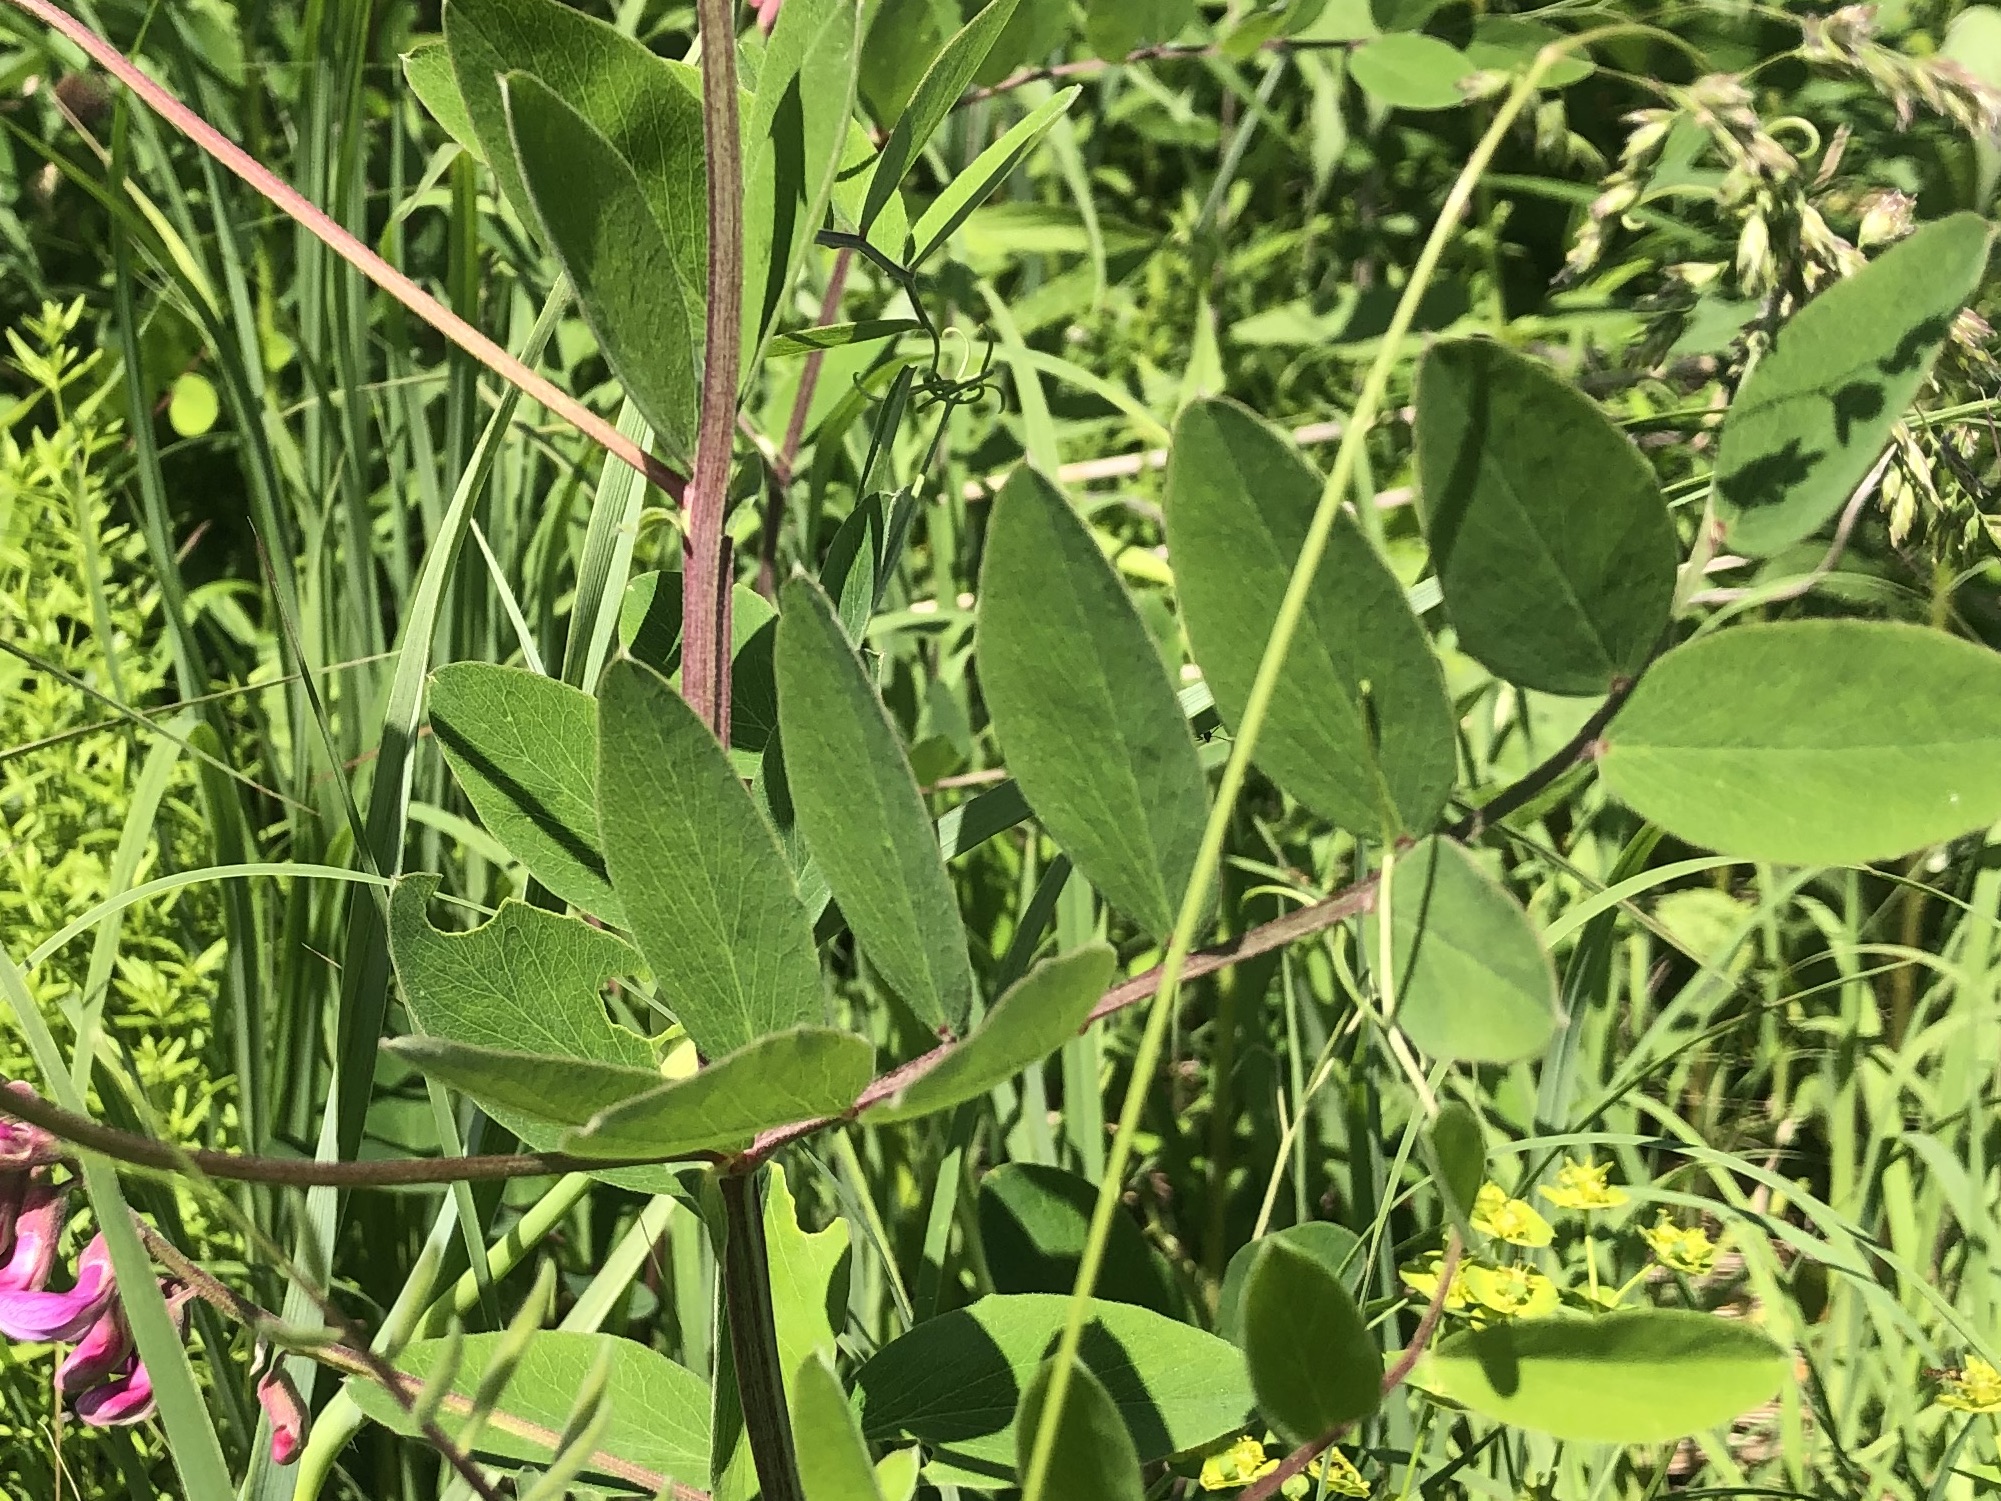 Veiny Pea leaves and stems in the Curtis Prairie in the University of Wisconsin-Madison Arboretum in Madison, Wisconsin on June 9, 2022.